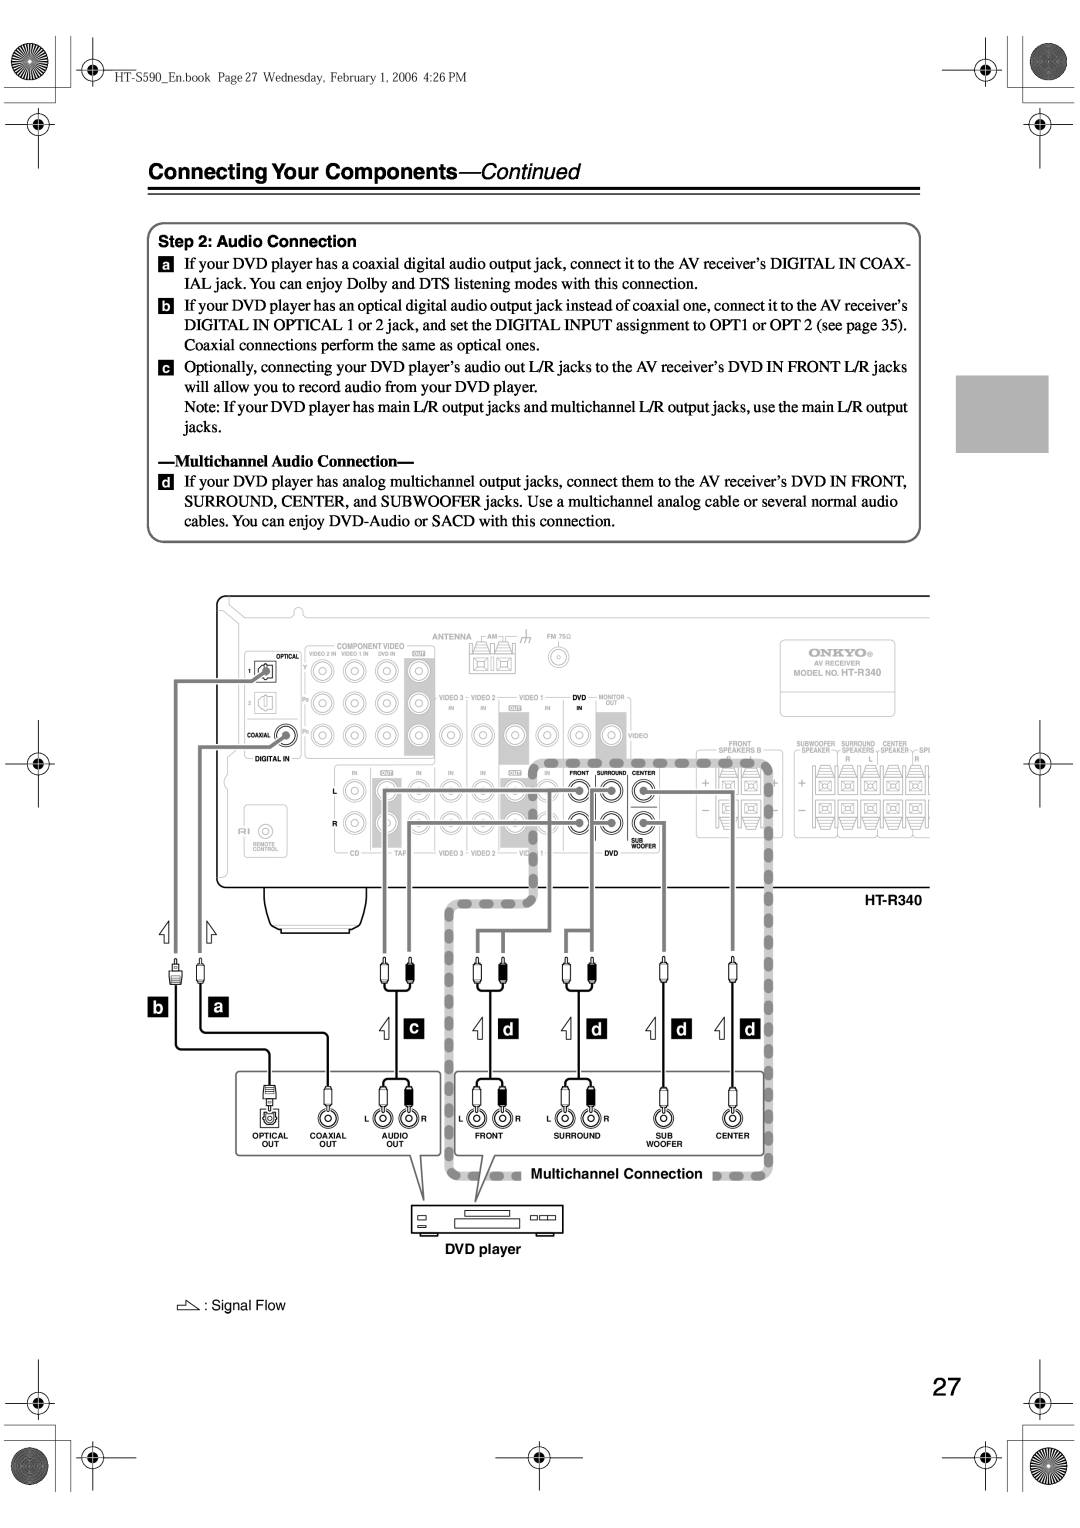 Onkyo SKW-340, SKC-340C, SKF-340F, SKM-340S instruction manual b a c, Connecting Your Components-Continued, Audio Connection 